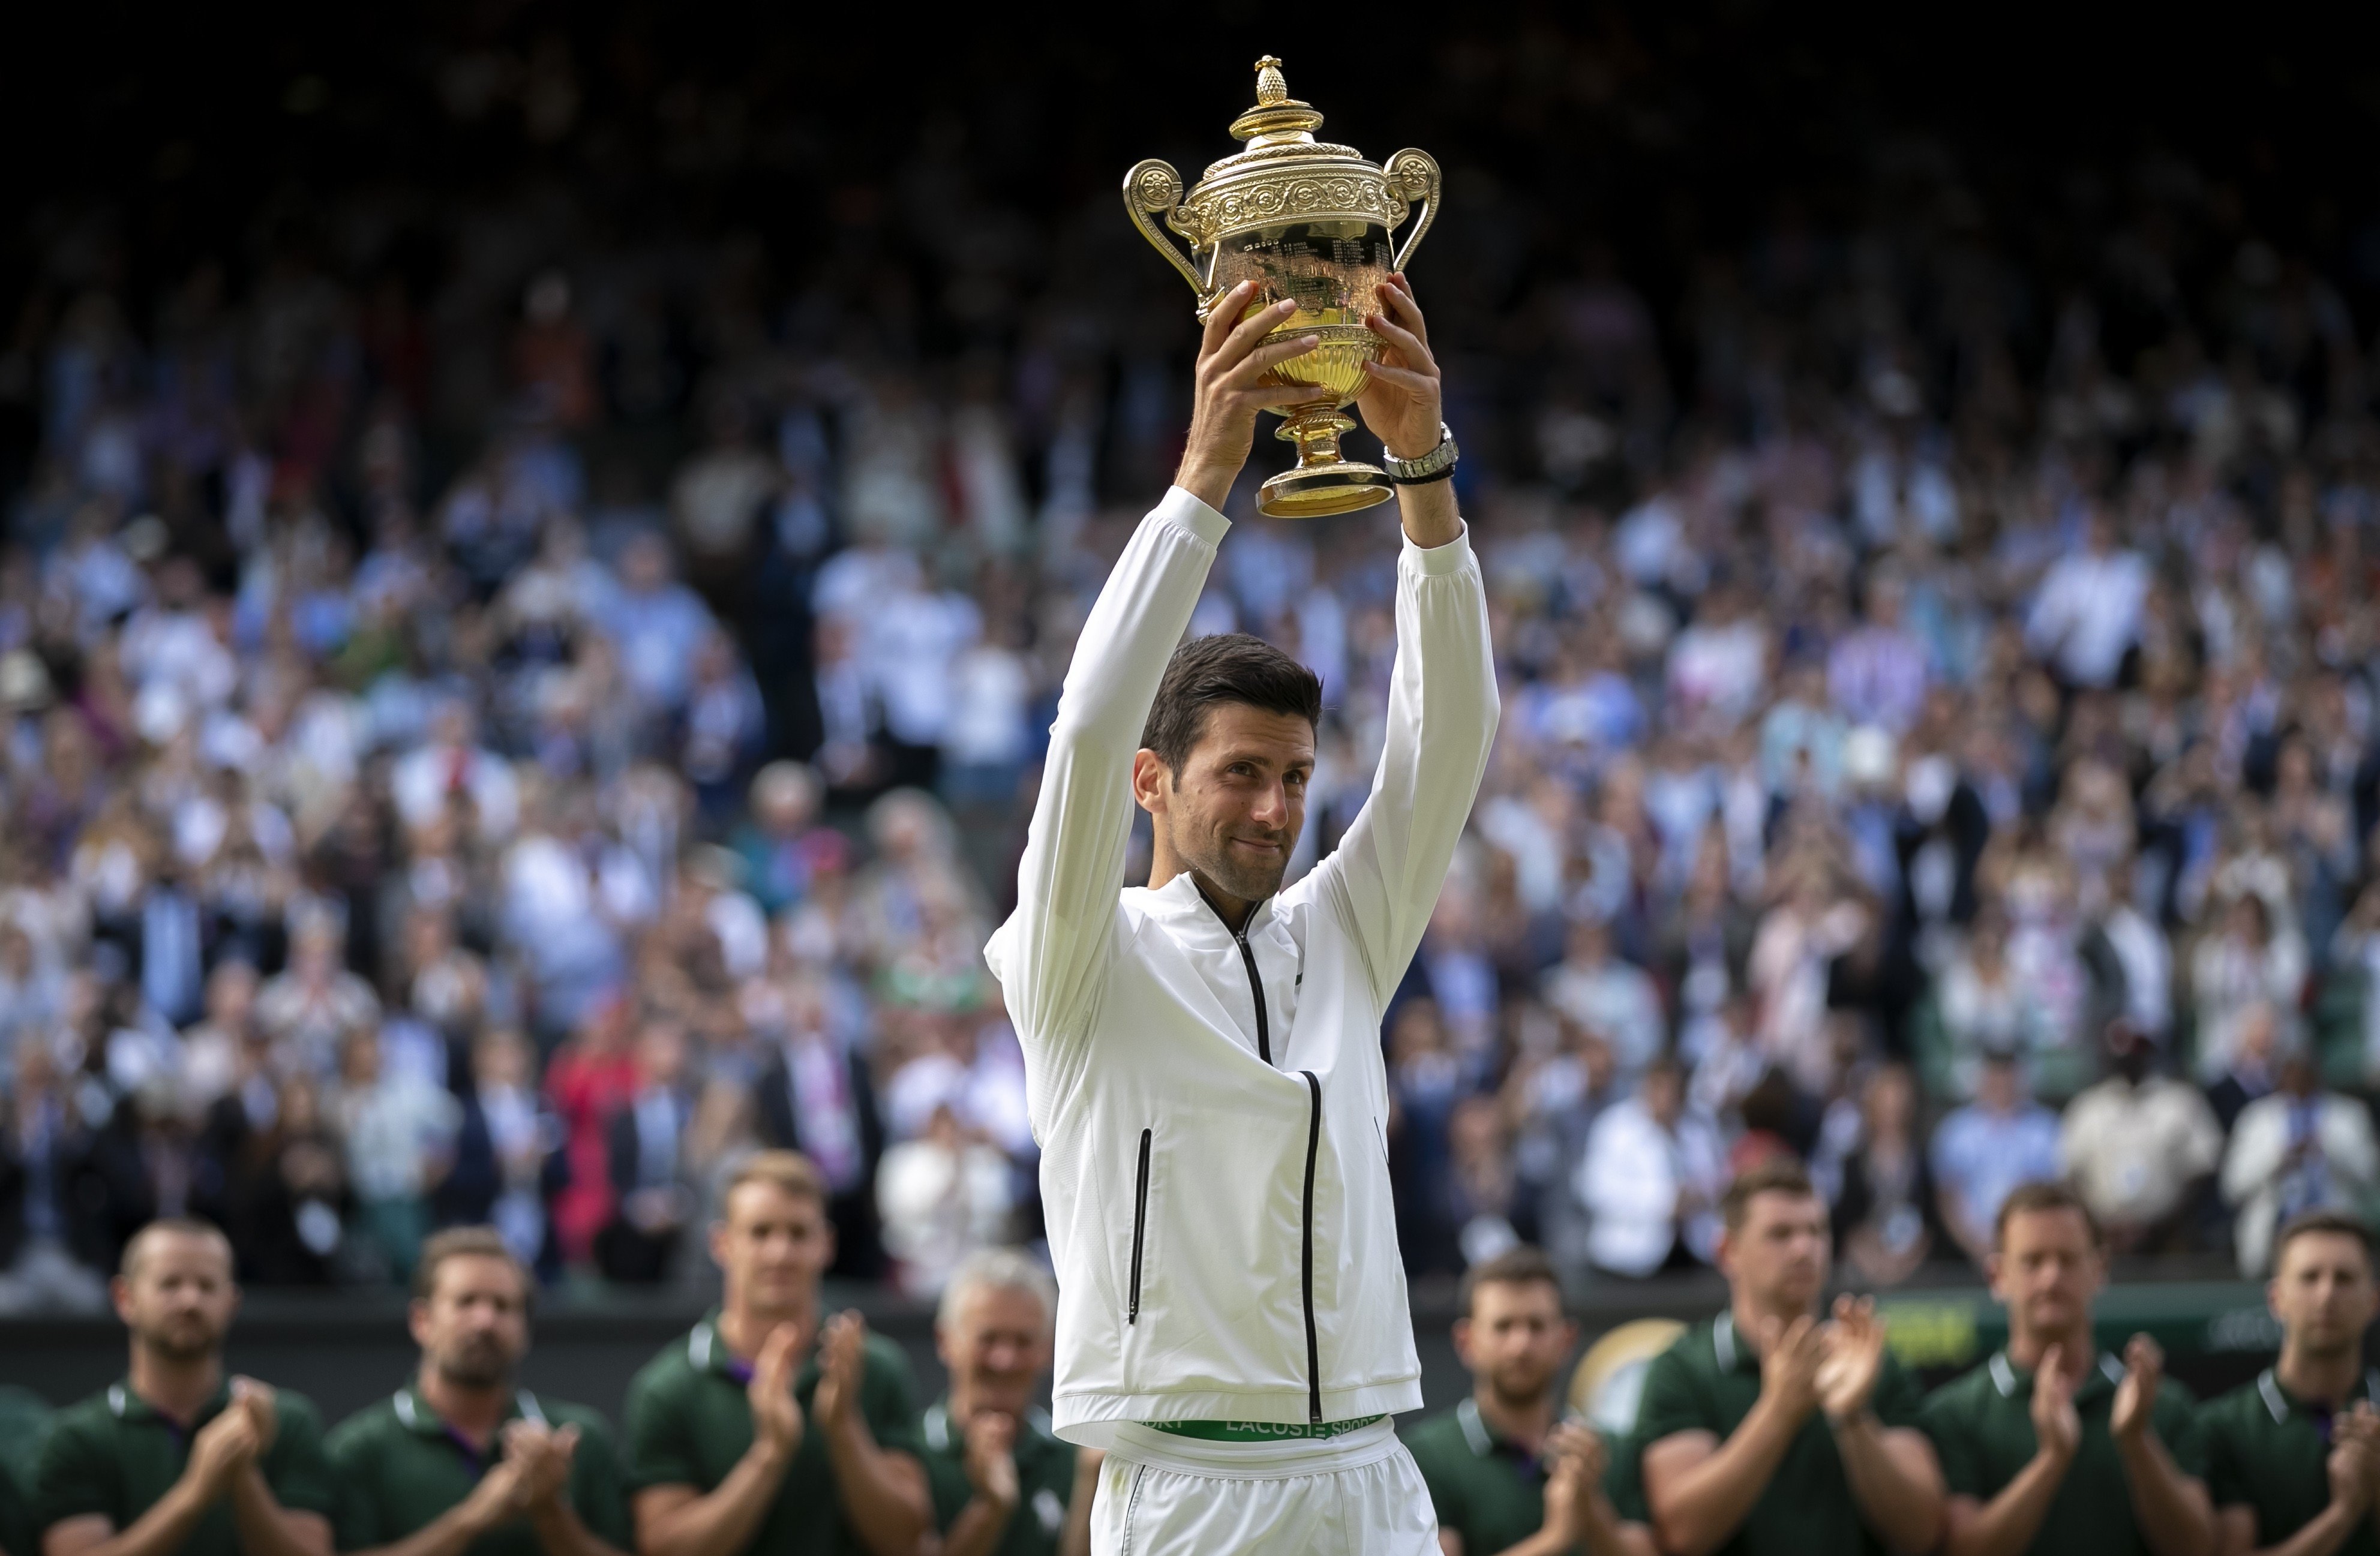 Novak Djokovic of Serbia holds the trophy after winning the men’s singles final against Roger Federer of Switzerland at Wimbledon. Photo: Xinhua